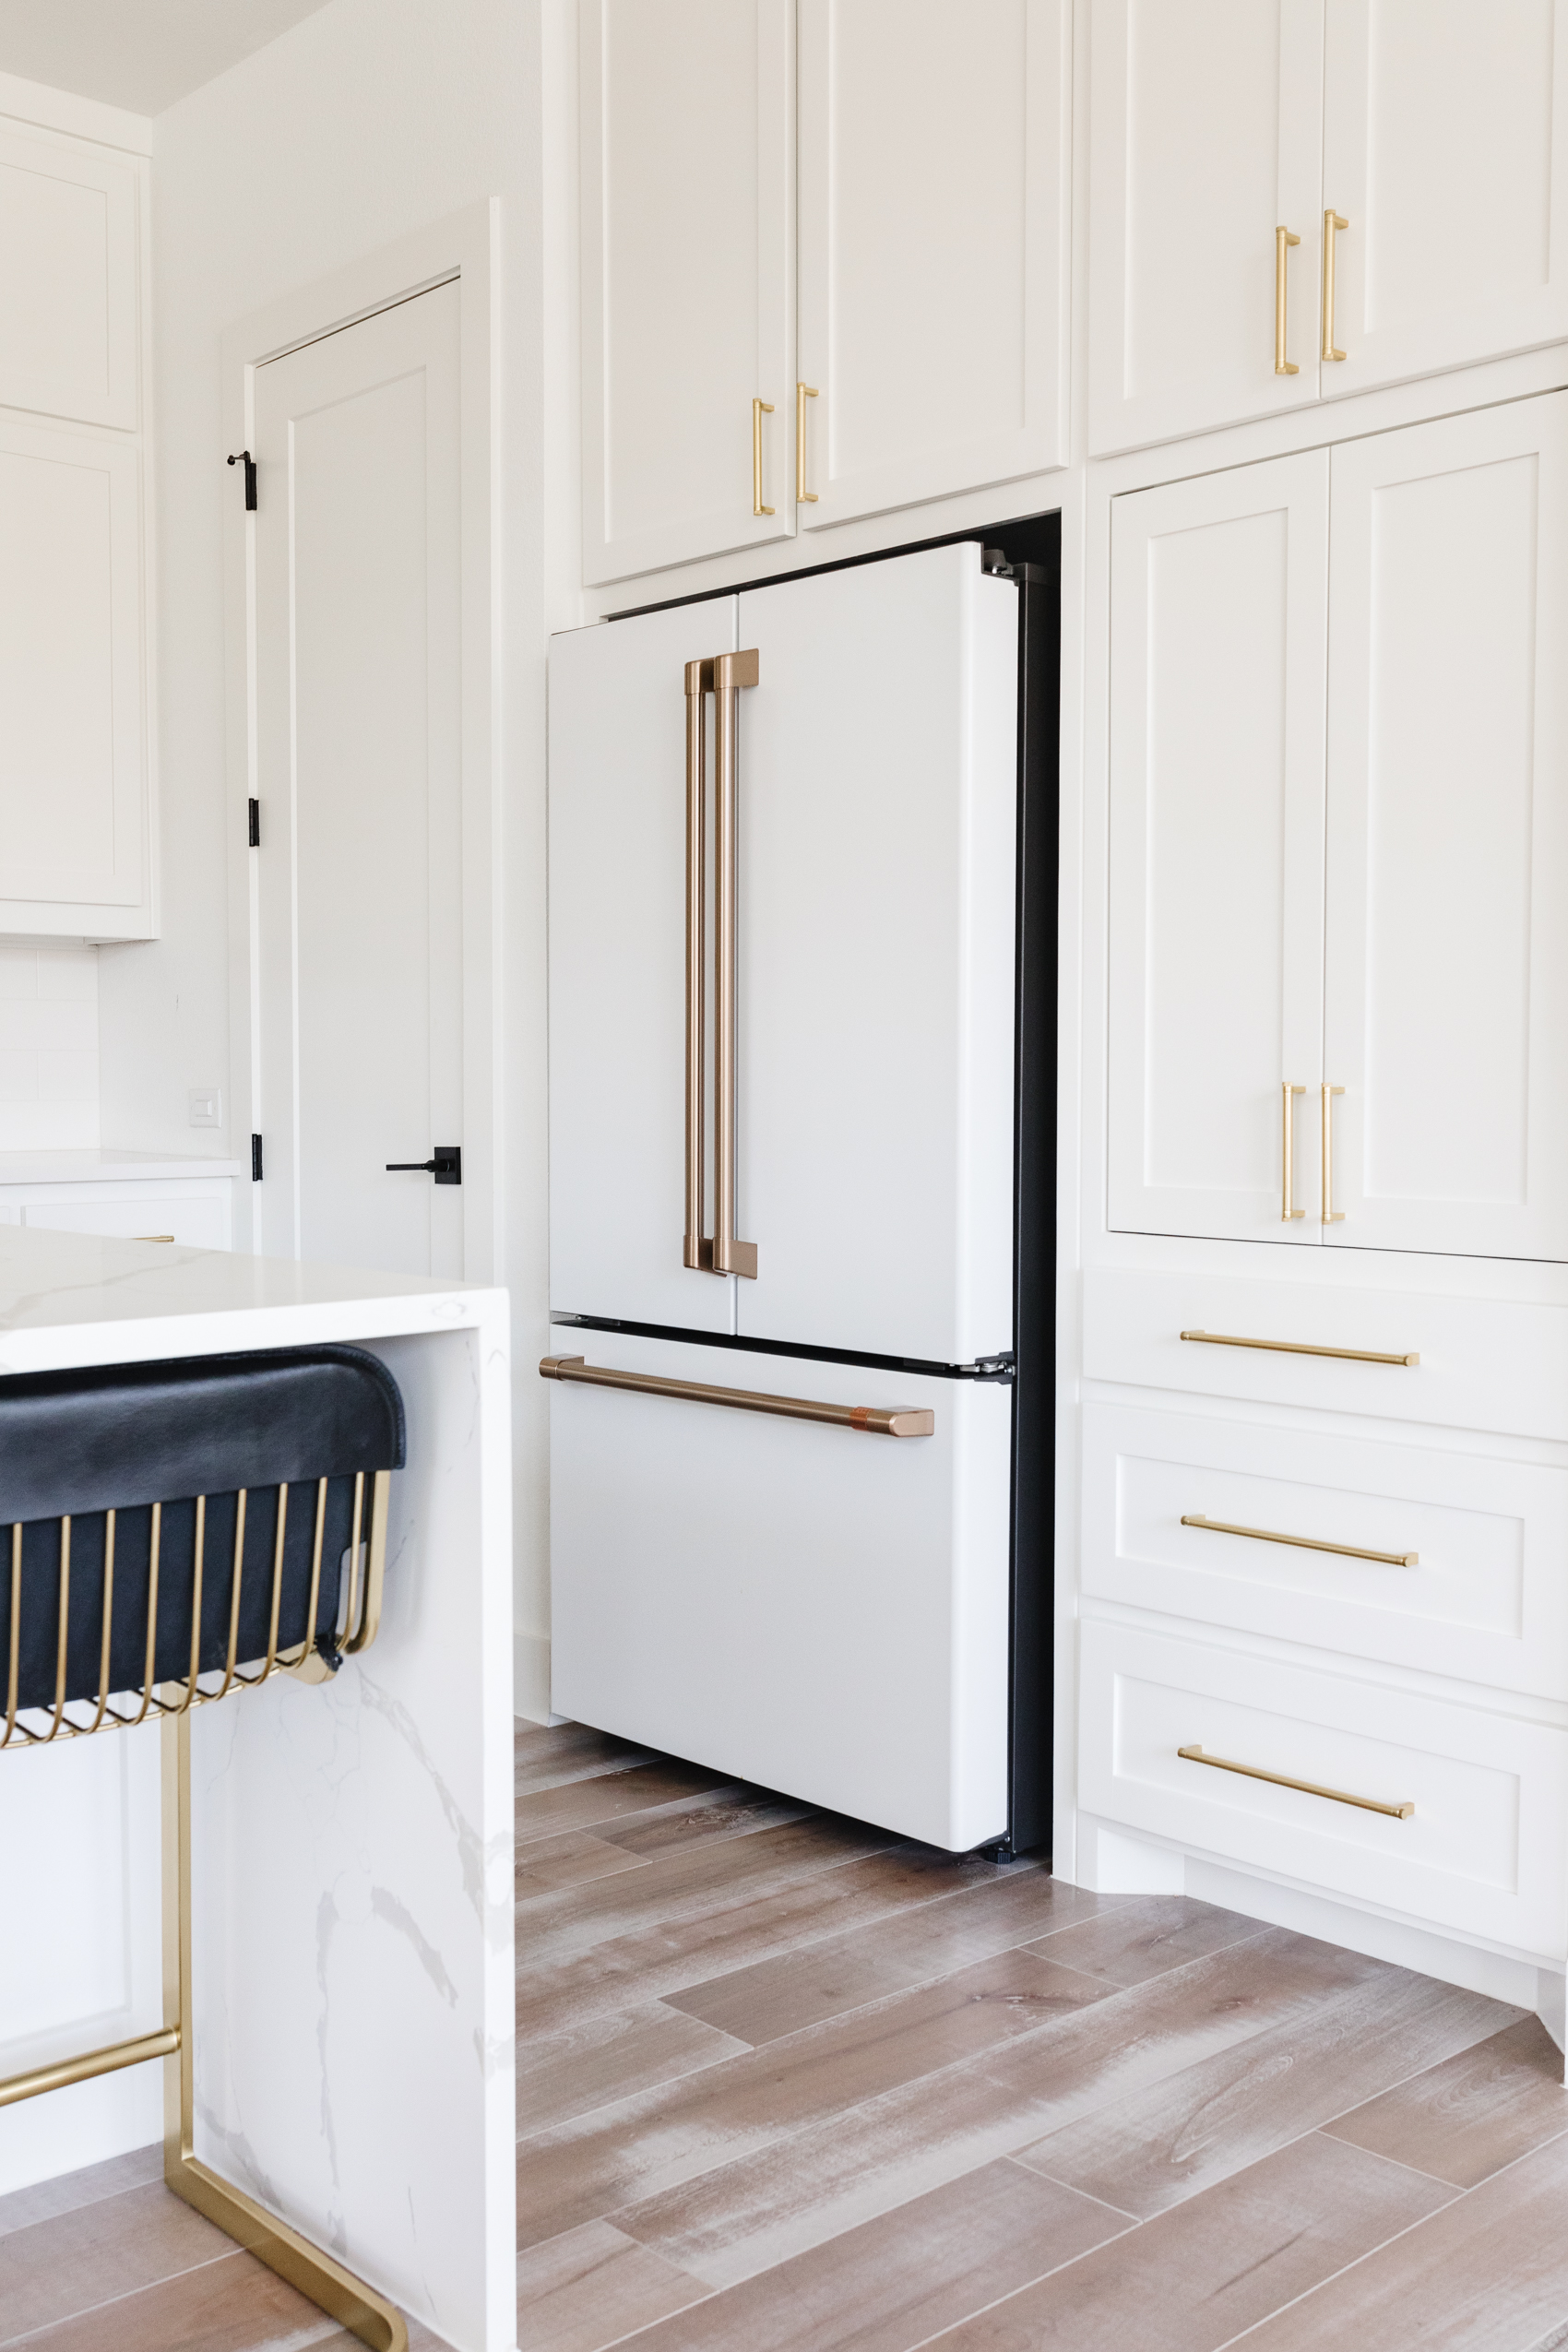 Cafe Appliances refrigerator in matte white with brushed bronze handles in a white kitchen with shaker style cabinets and brass hardware